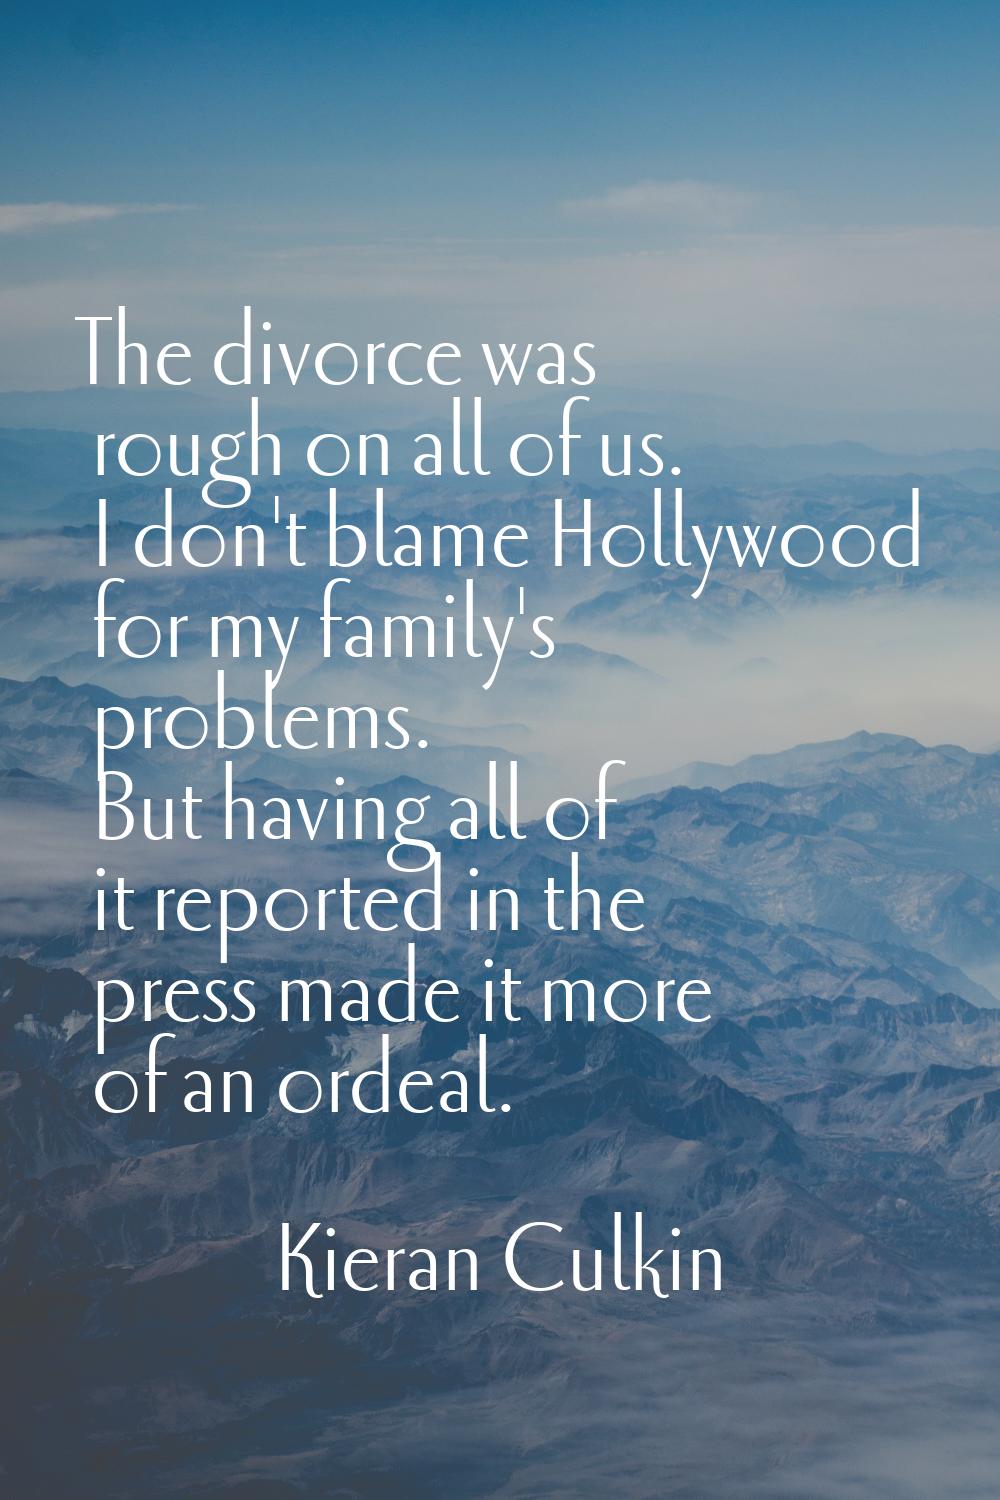 The divorce was rough on all of us. I don't blame Hollywood for my family's problems. But having al